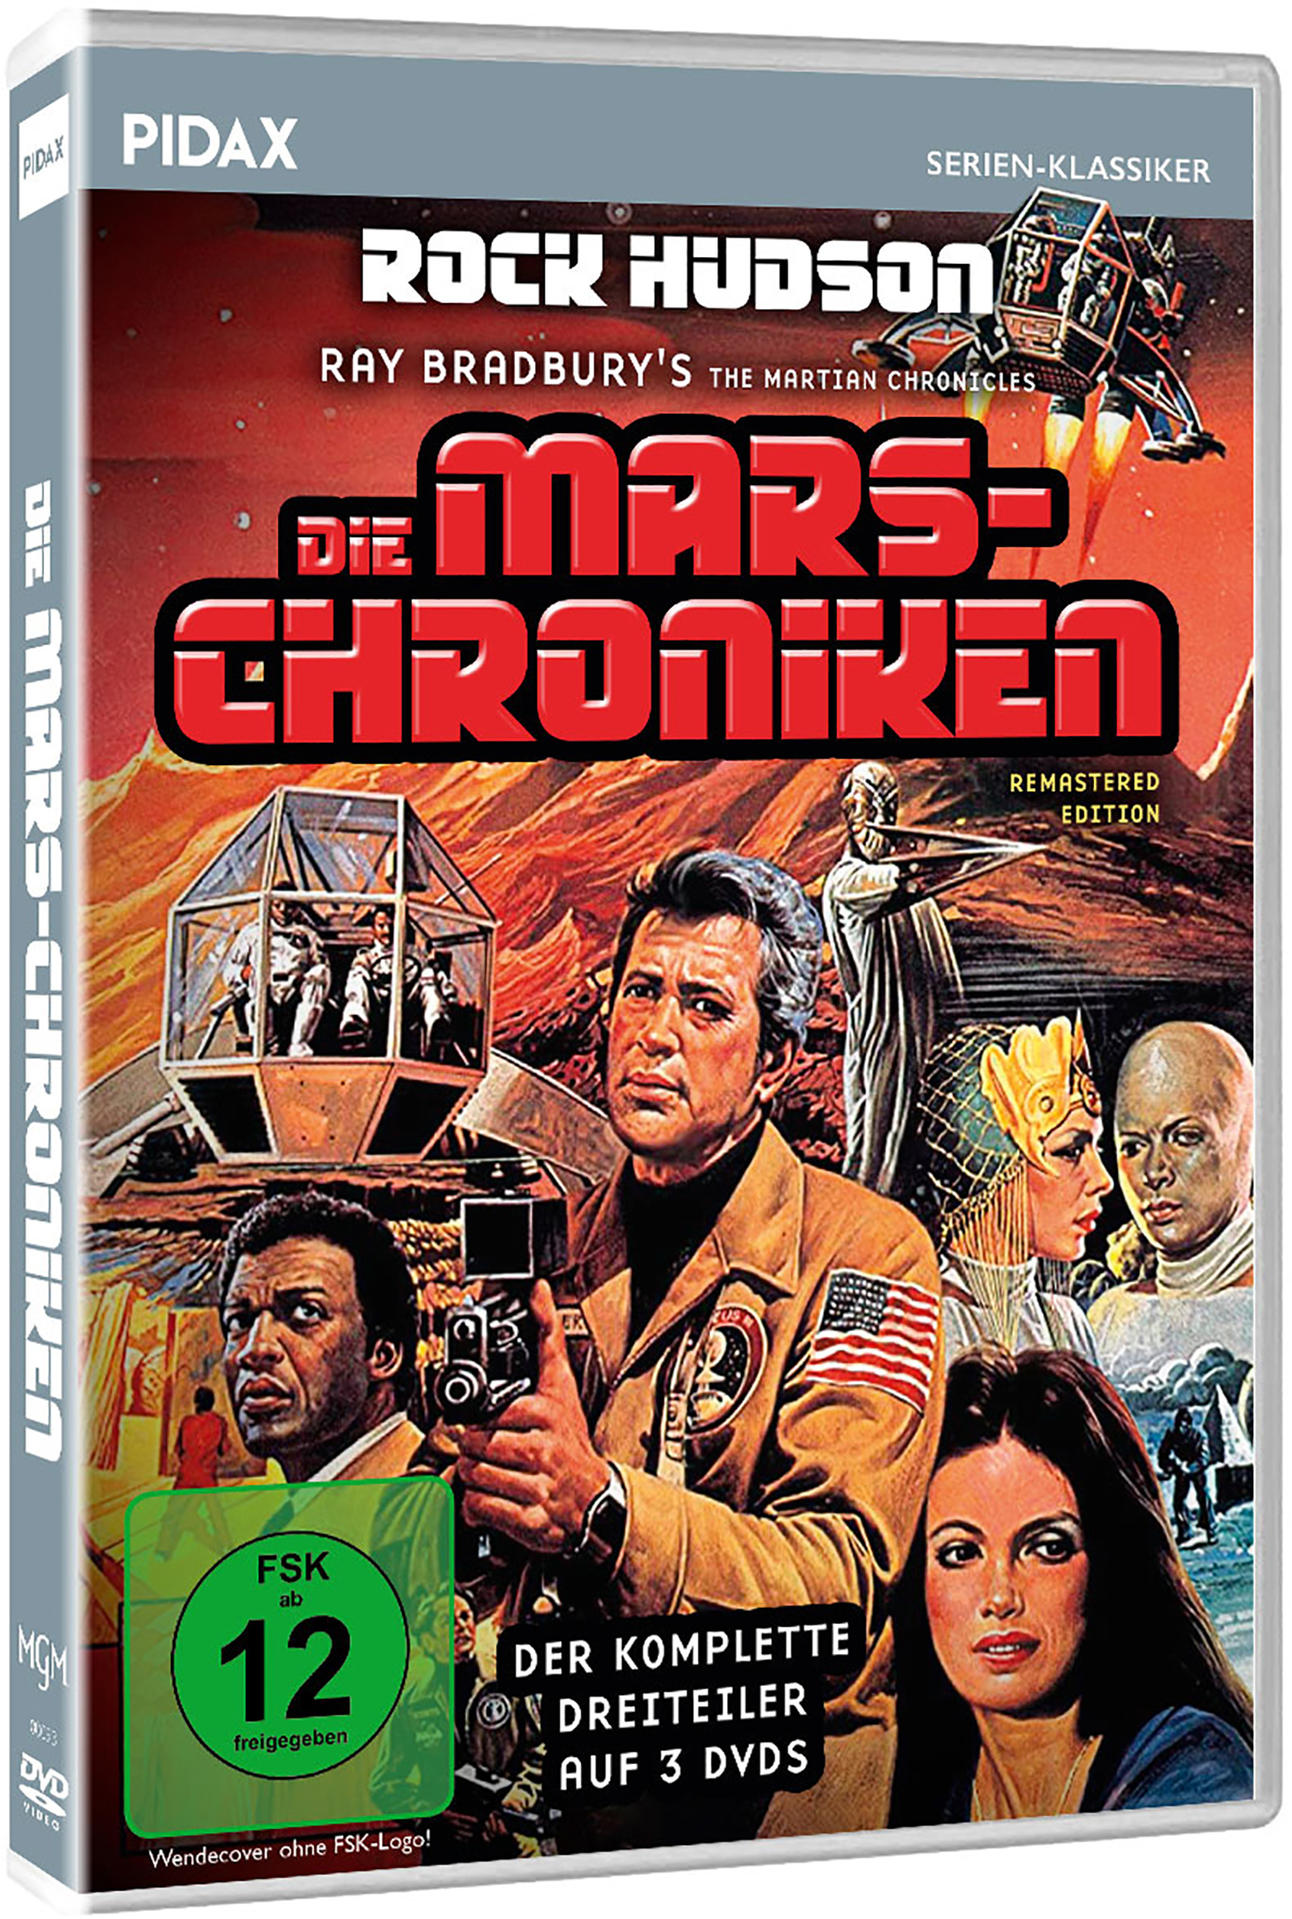 Die Mars-Chroniken (The DVD Martian Edition Chronicles) Remastered 